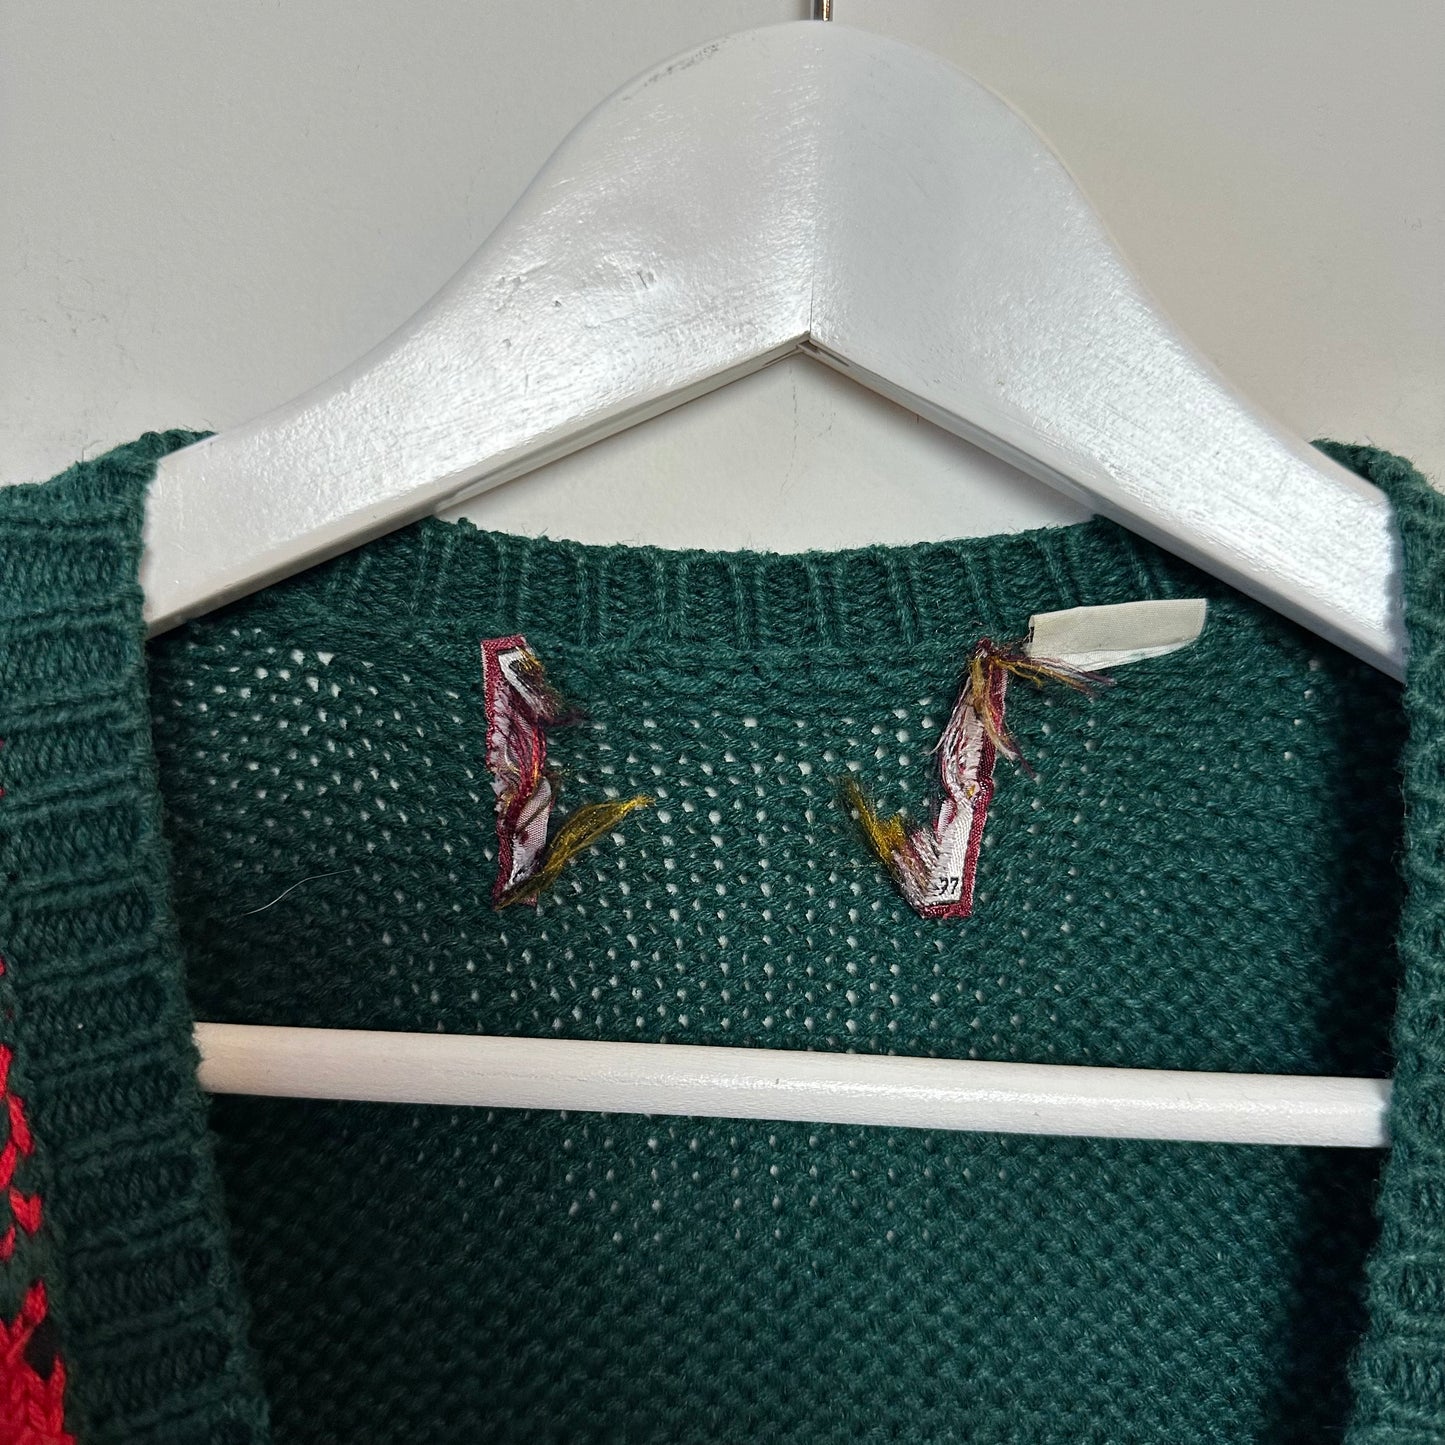 Vintage 90s Christmas Sweater Vest Chunky Knit Teddy Bears Red Green Plaid